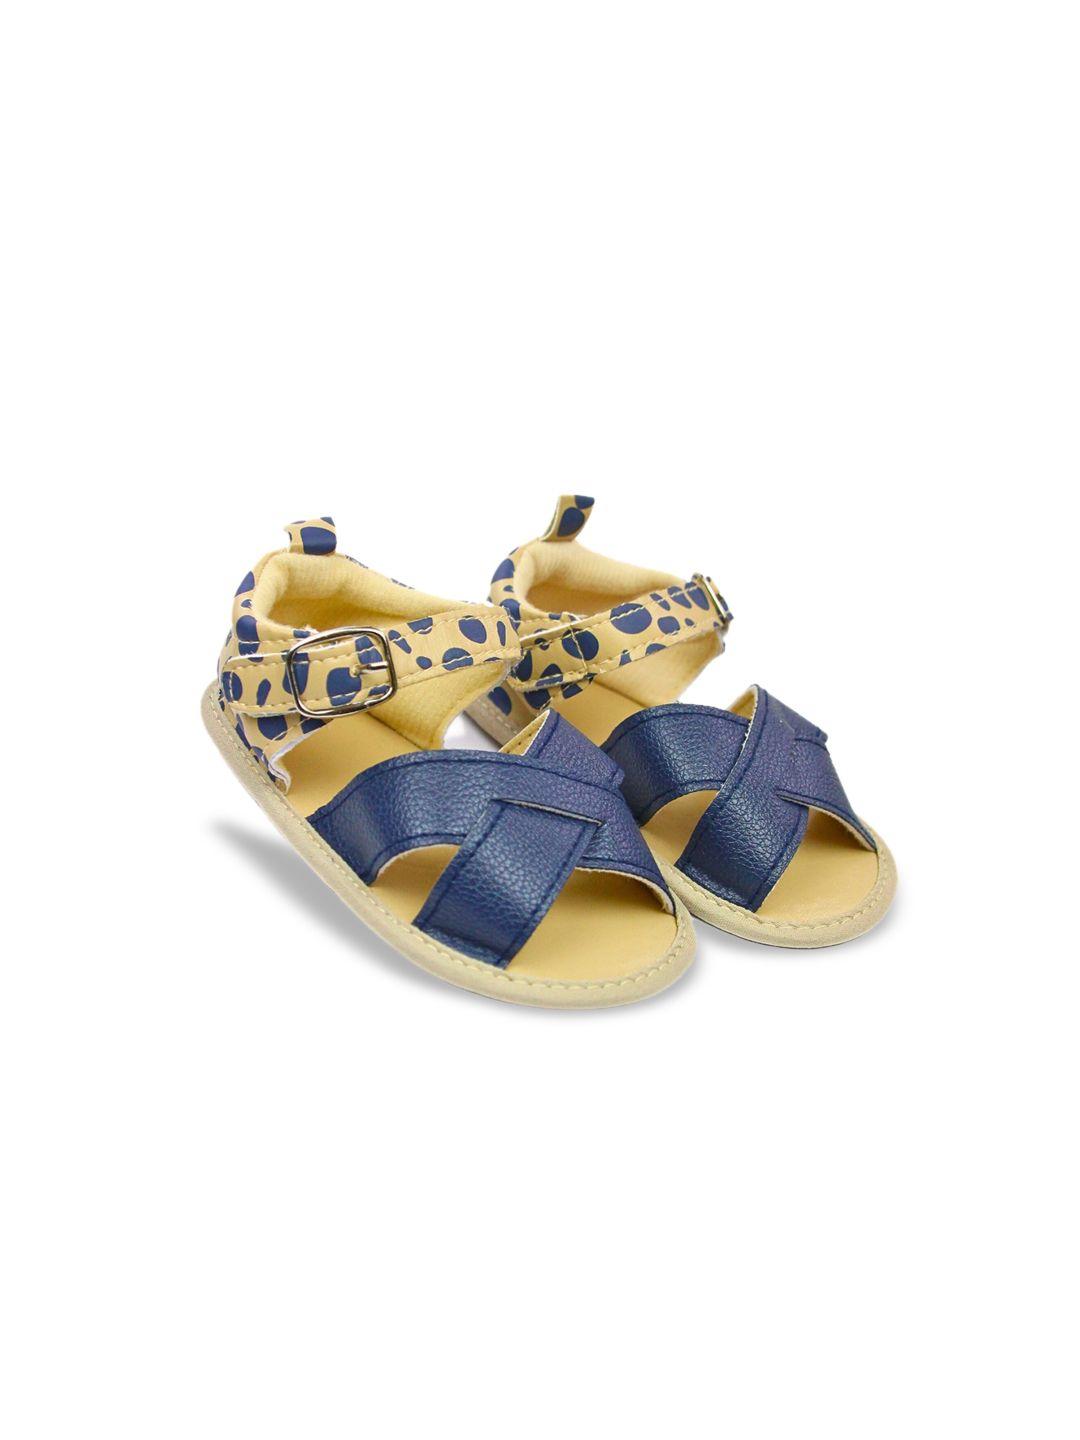 baesd-infant-kids-printed-open-toe-flats-with-buckles